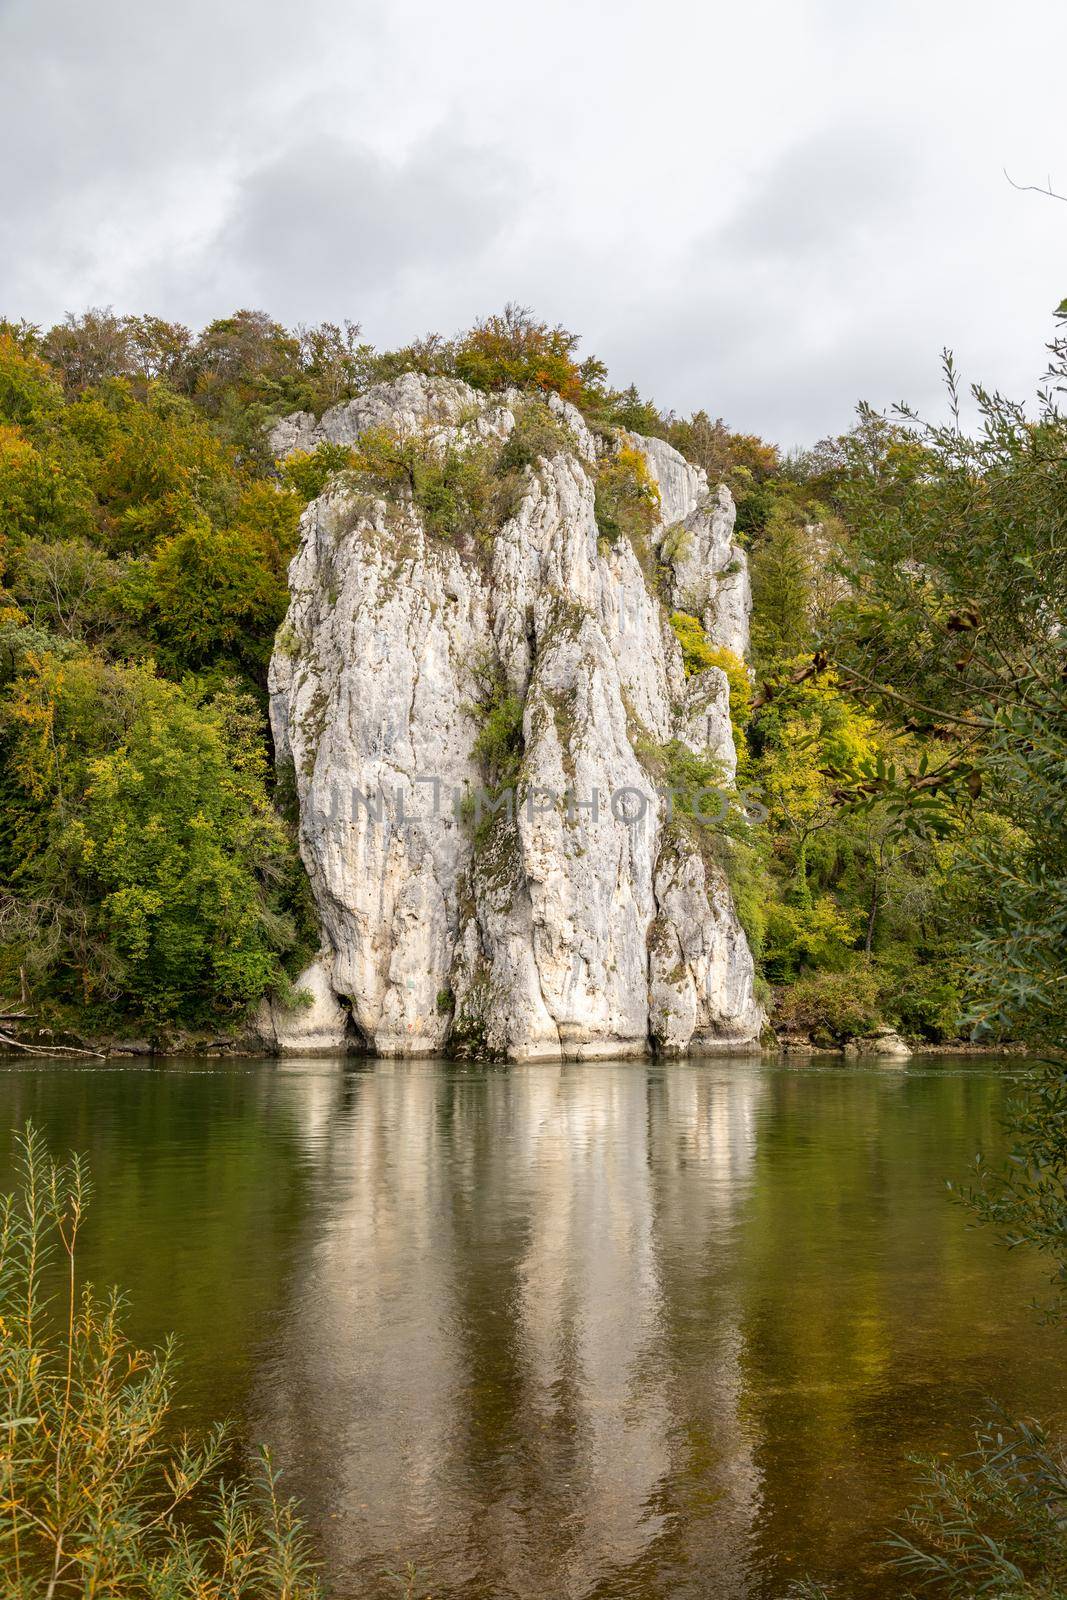 Danube river at Danube breakthrough near Kelheim, Bavaria, Germany in autumn with limestone rock formations and plants with colorful leaves